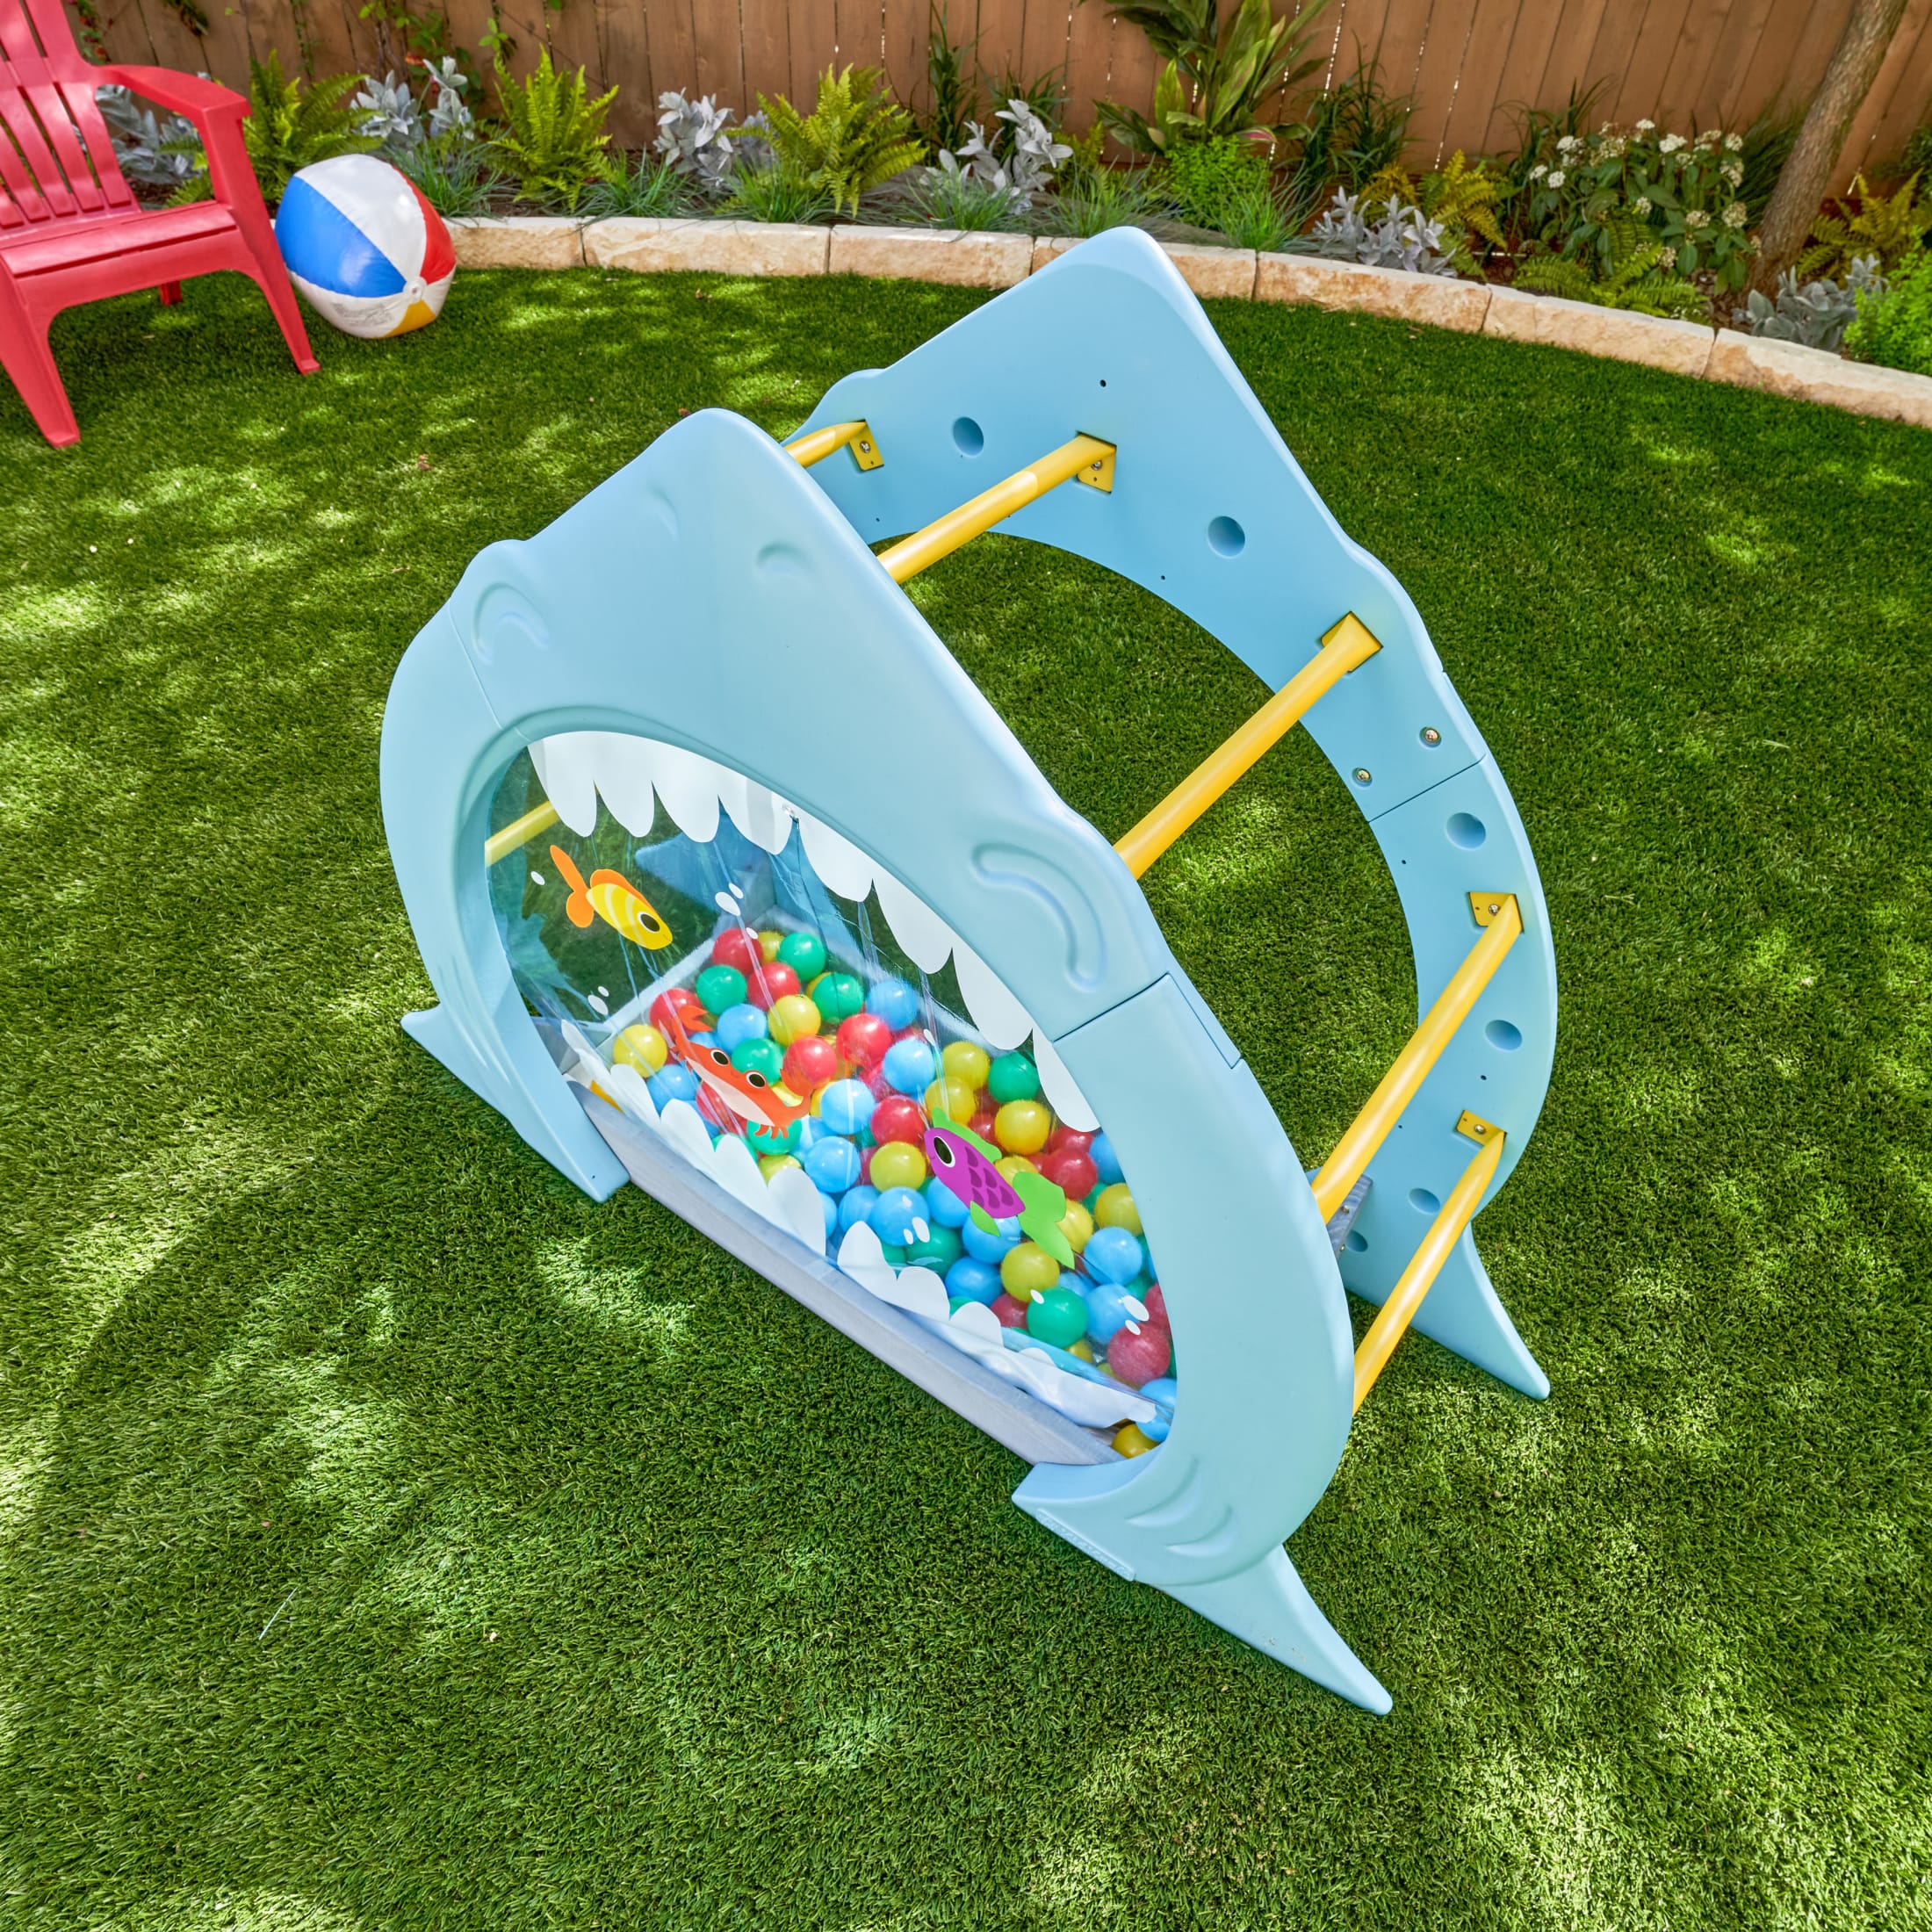 KidKraft Shark Escape Arched Outdoor Toddler Play Climber - image 4 of 9